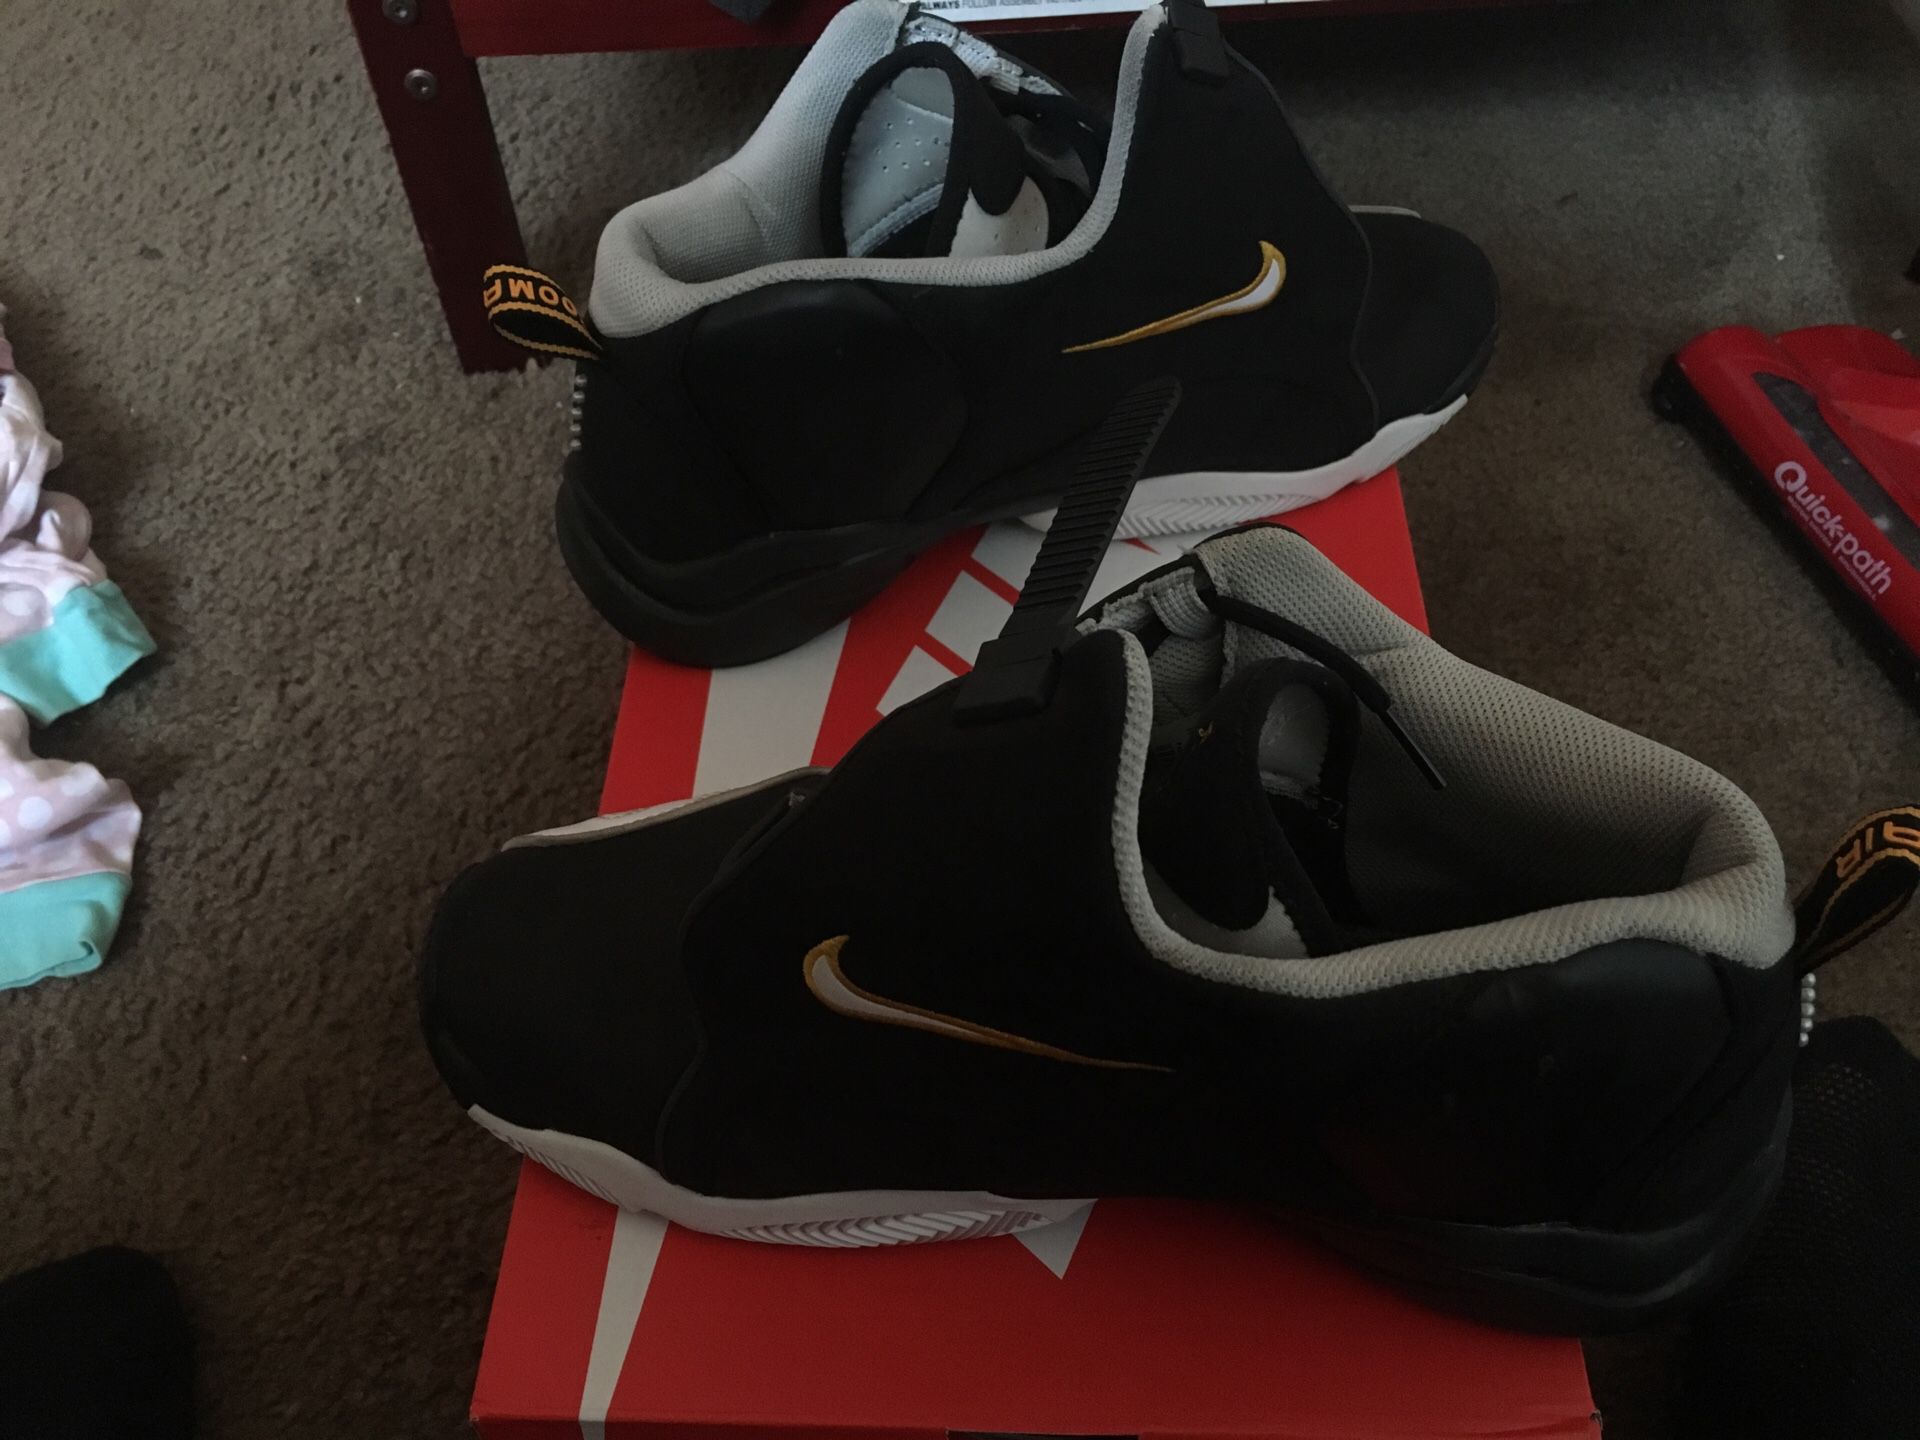 Nike Zoom Gary Payton The Goove black white gold size 11 (fits 10.5) they cut short so fits like 10.5 men’s brand new wore twice comes with original